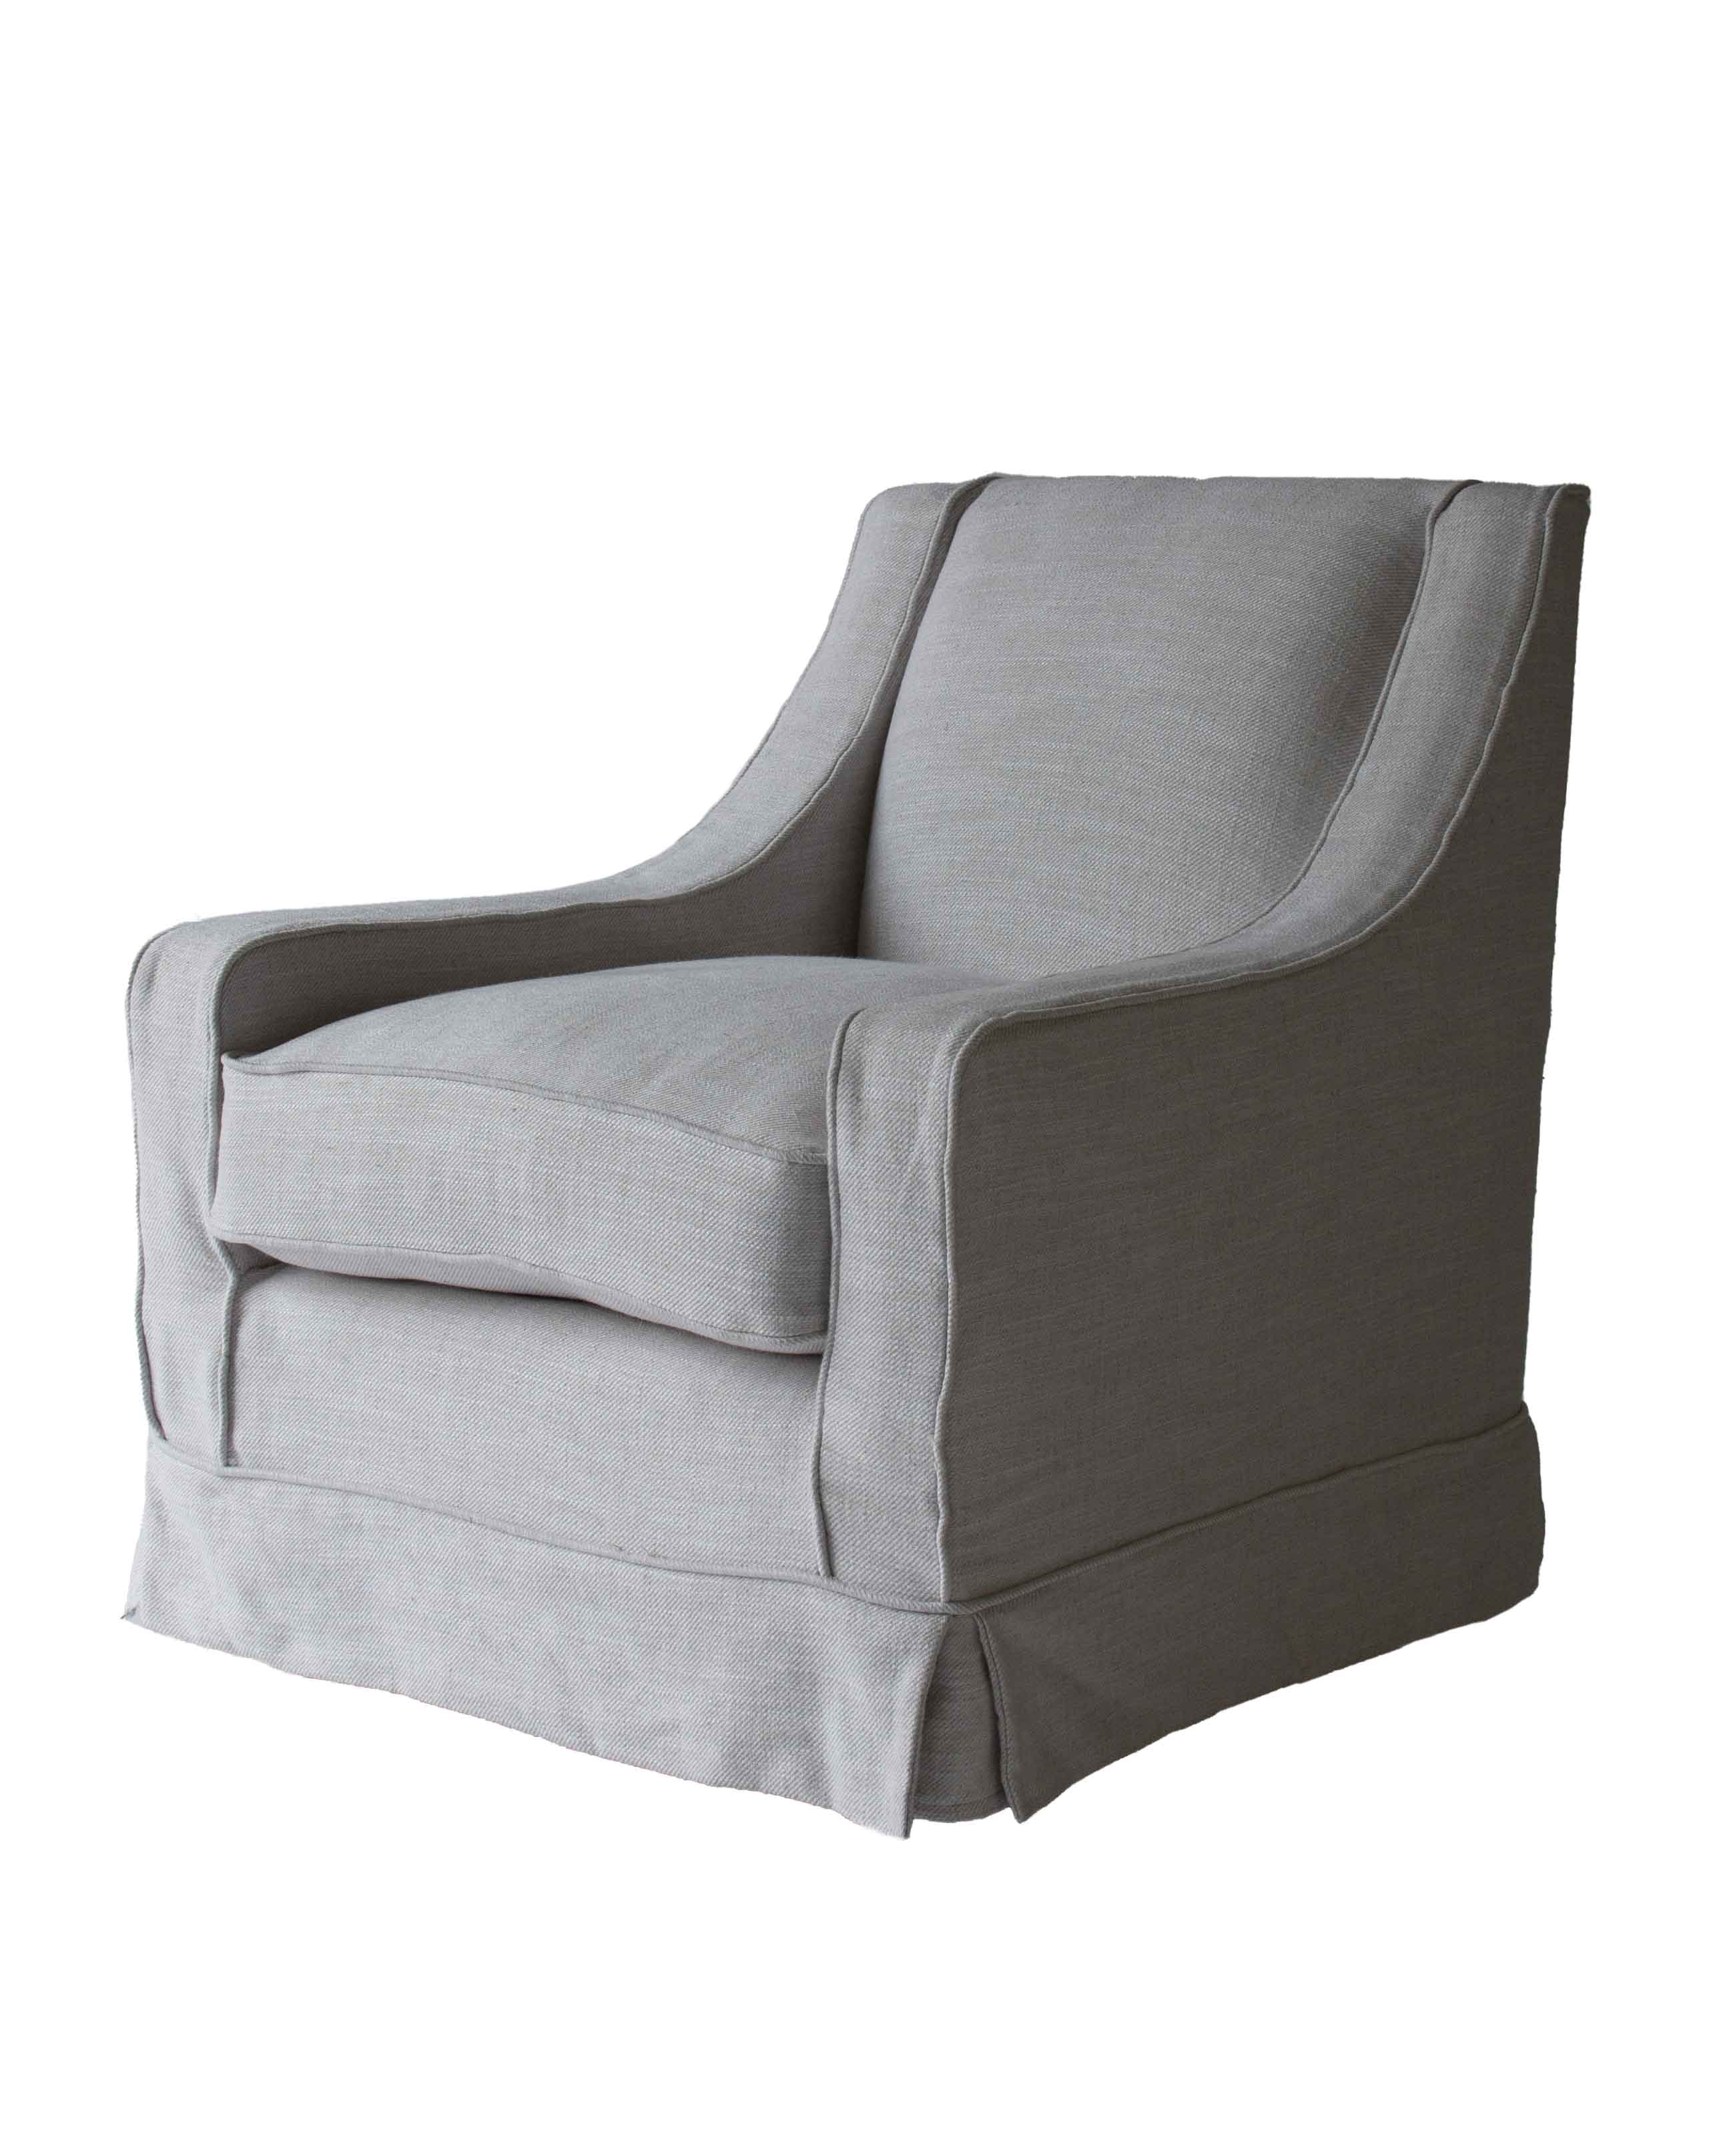 The Vannes Loose Cover Armchair